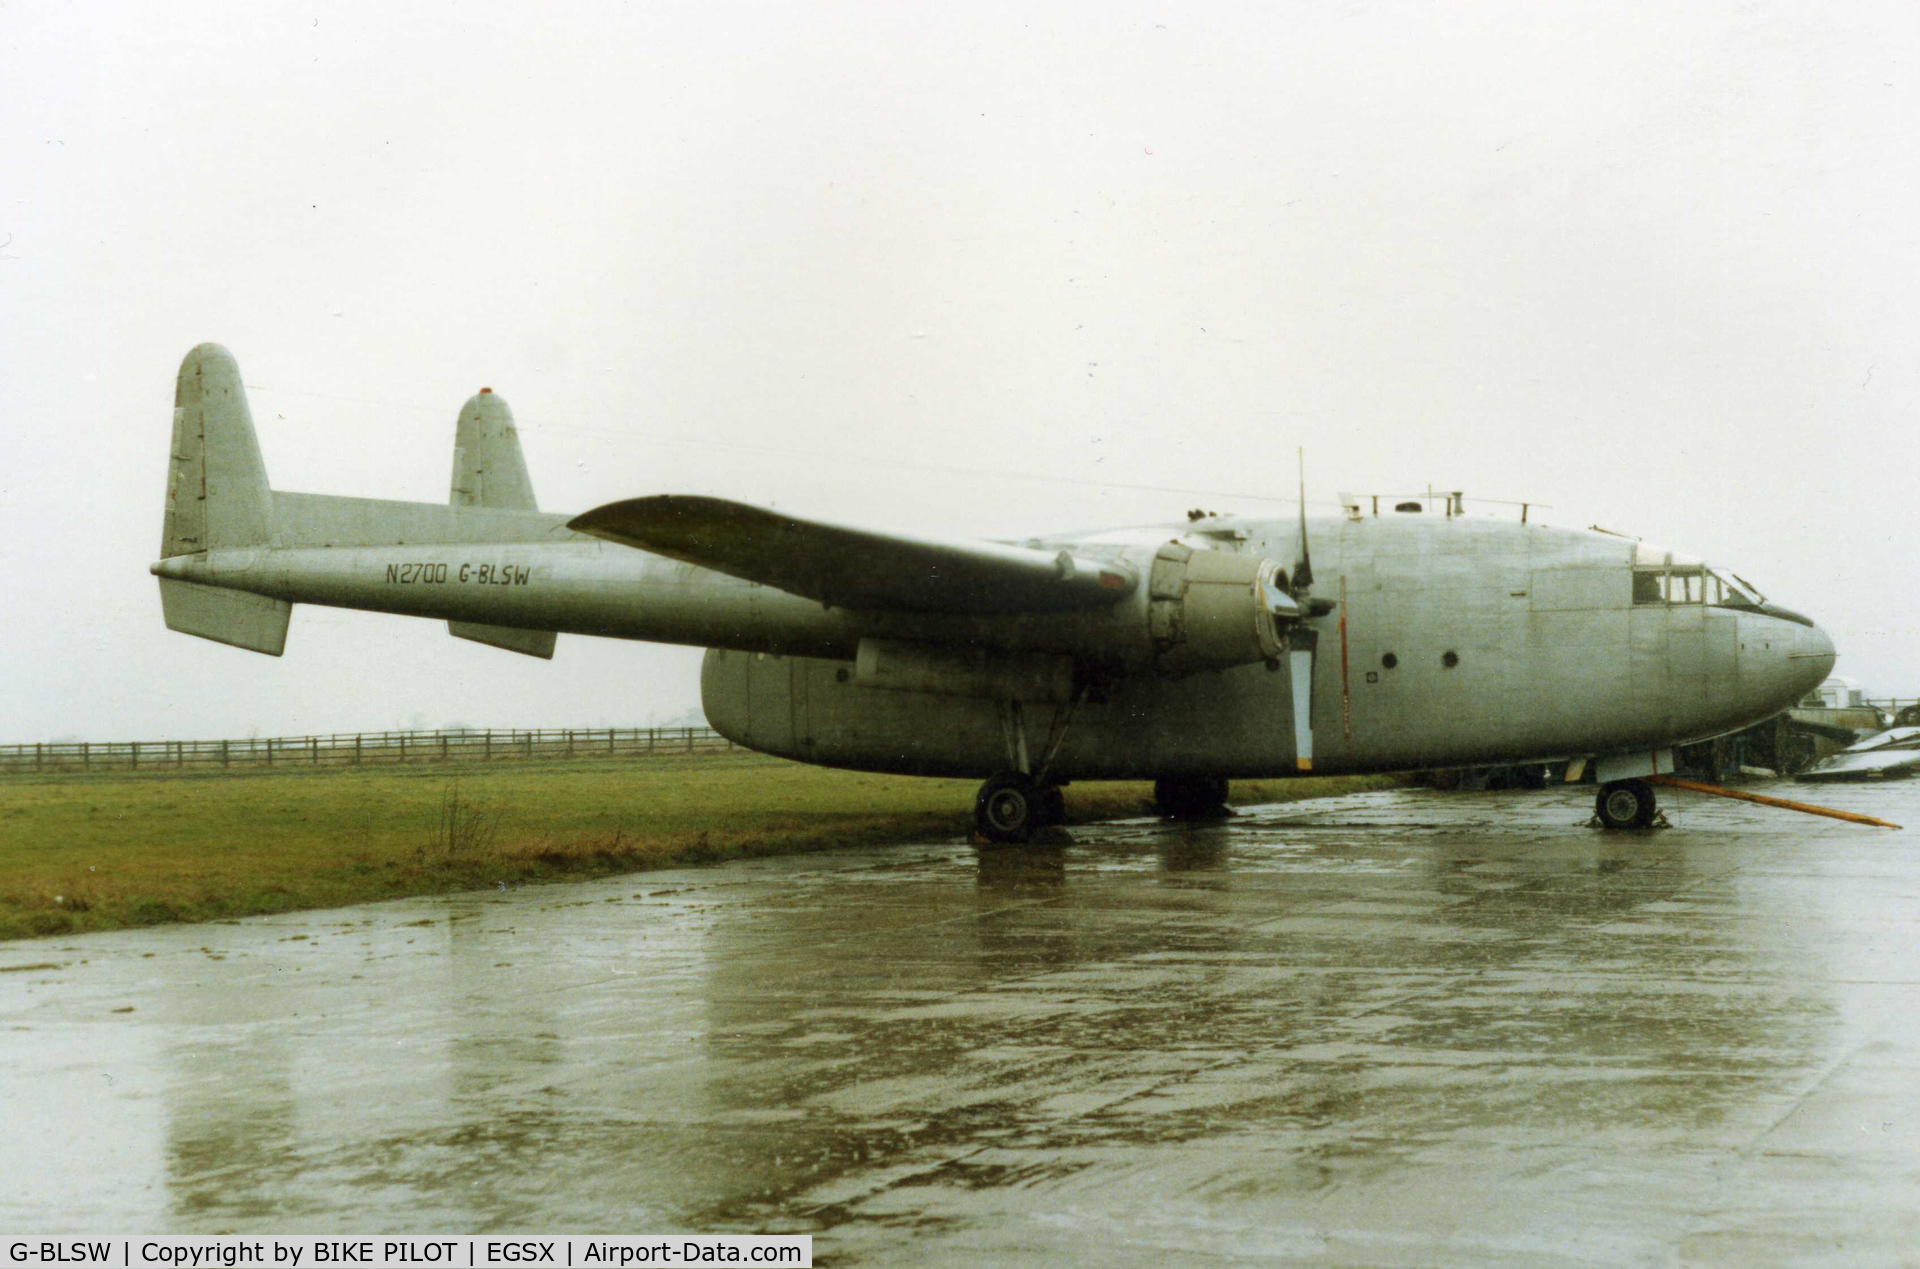 G-BLSW, 1951 Fairchild C-119G Flying Boxcar C/N 10689, WET DAY AT NORTH WEALD PROBABLE 1987